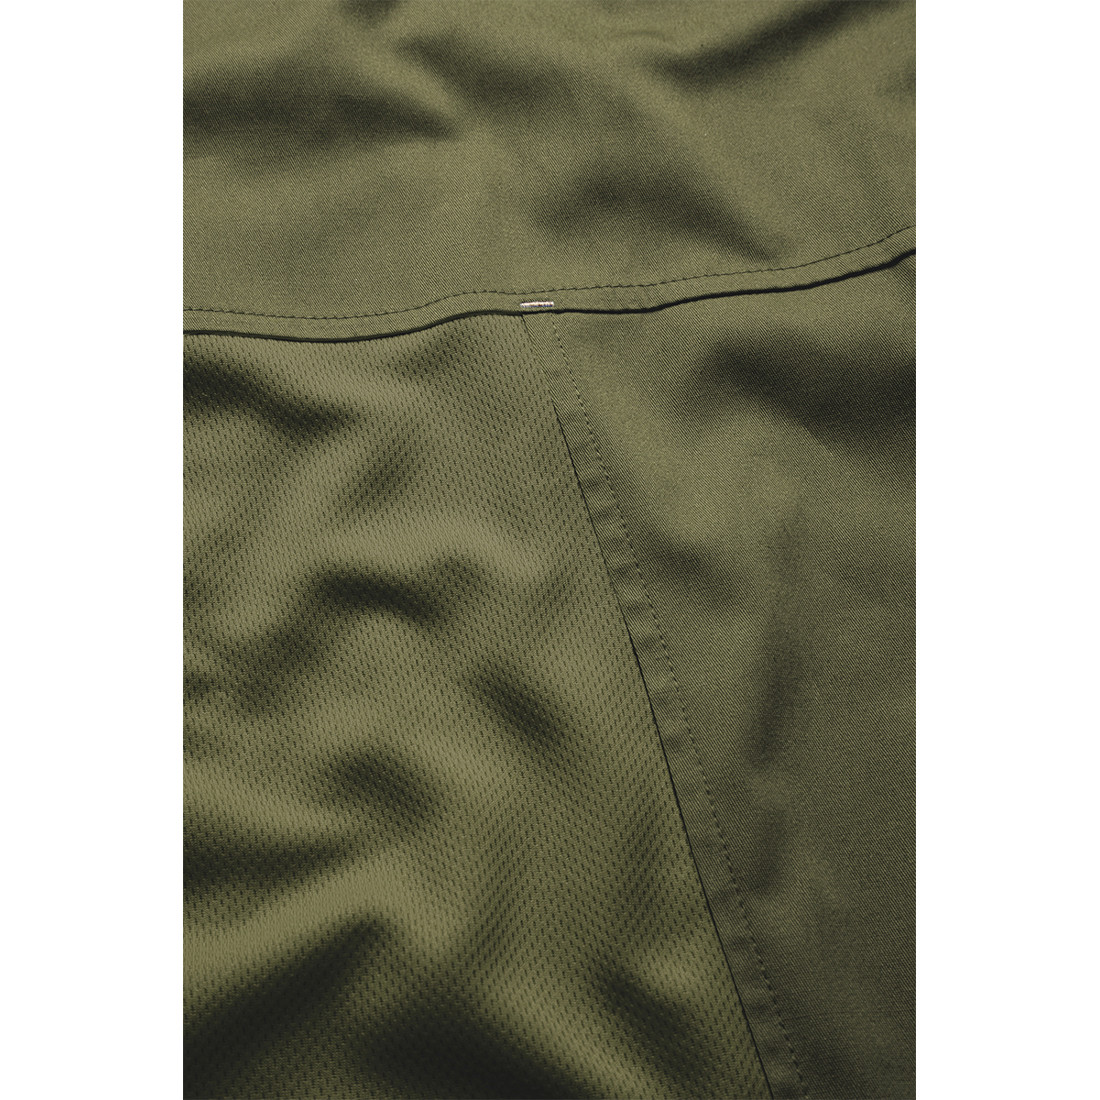 Kochjacke Green-Generation , aus nachhaltigem Material , 72% GRS Certified Recycled Polyester / 28% Conventional Cotton - Arbeitskleidung